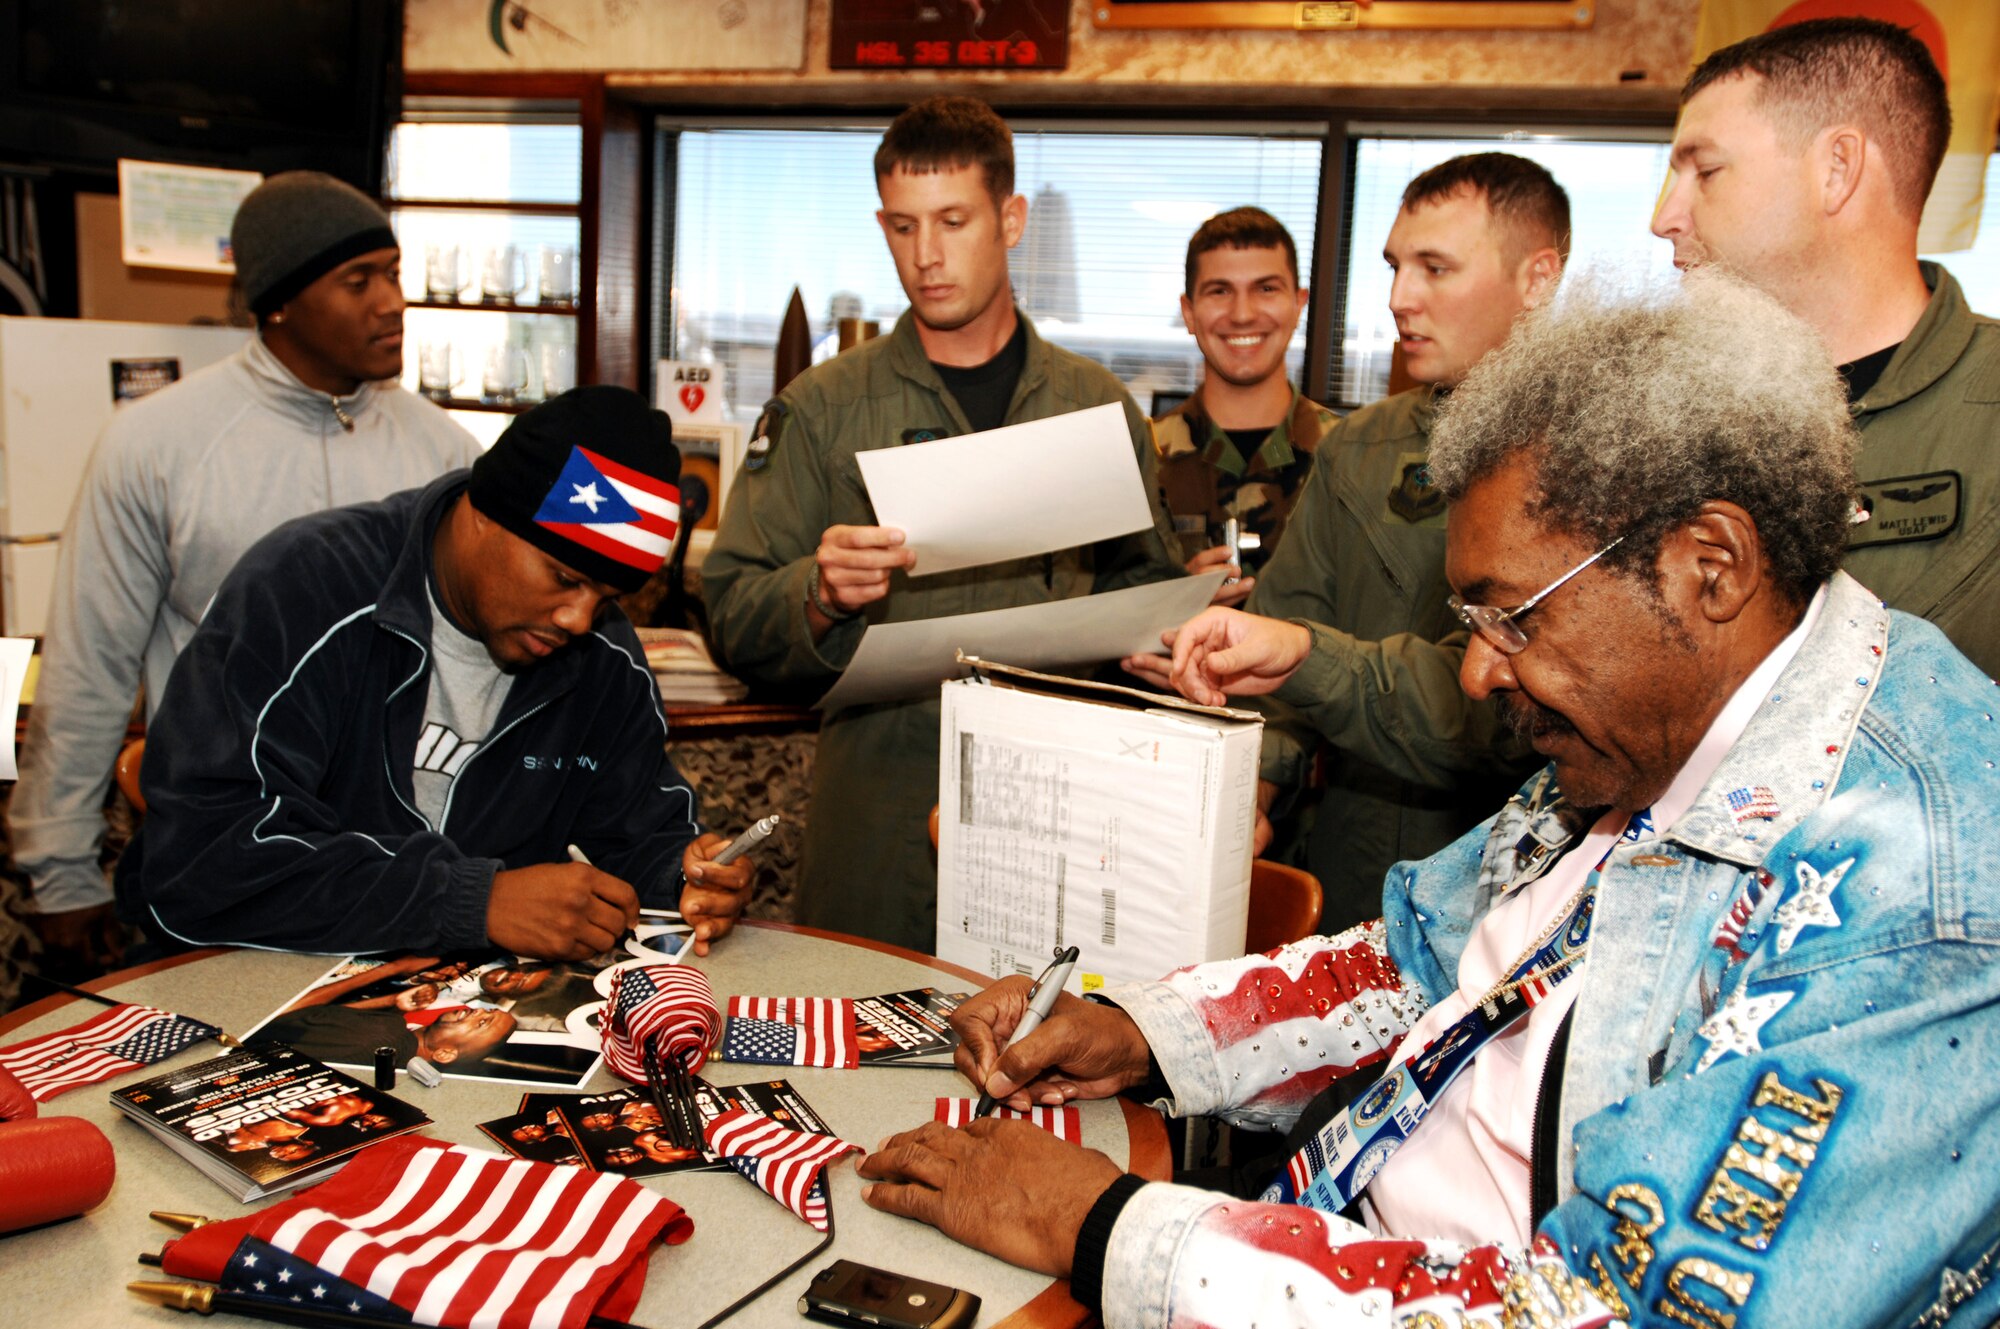 Professional boxer Felix Trinidad (left) and promoter Don King (right) sign autographs and take pictures with Airmen from the 4th Special Operations Squadron Dec. 5 at Hurlburt Field, Fla. Mr. Trinidad, Mr. King and boxer Roy Jones Jr., visited Hurlburt Field as part of their tour of military installations to show support for military members. (U.S. Air Force photo/Airman 1st Class Jason Epley)
